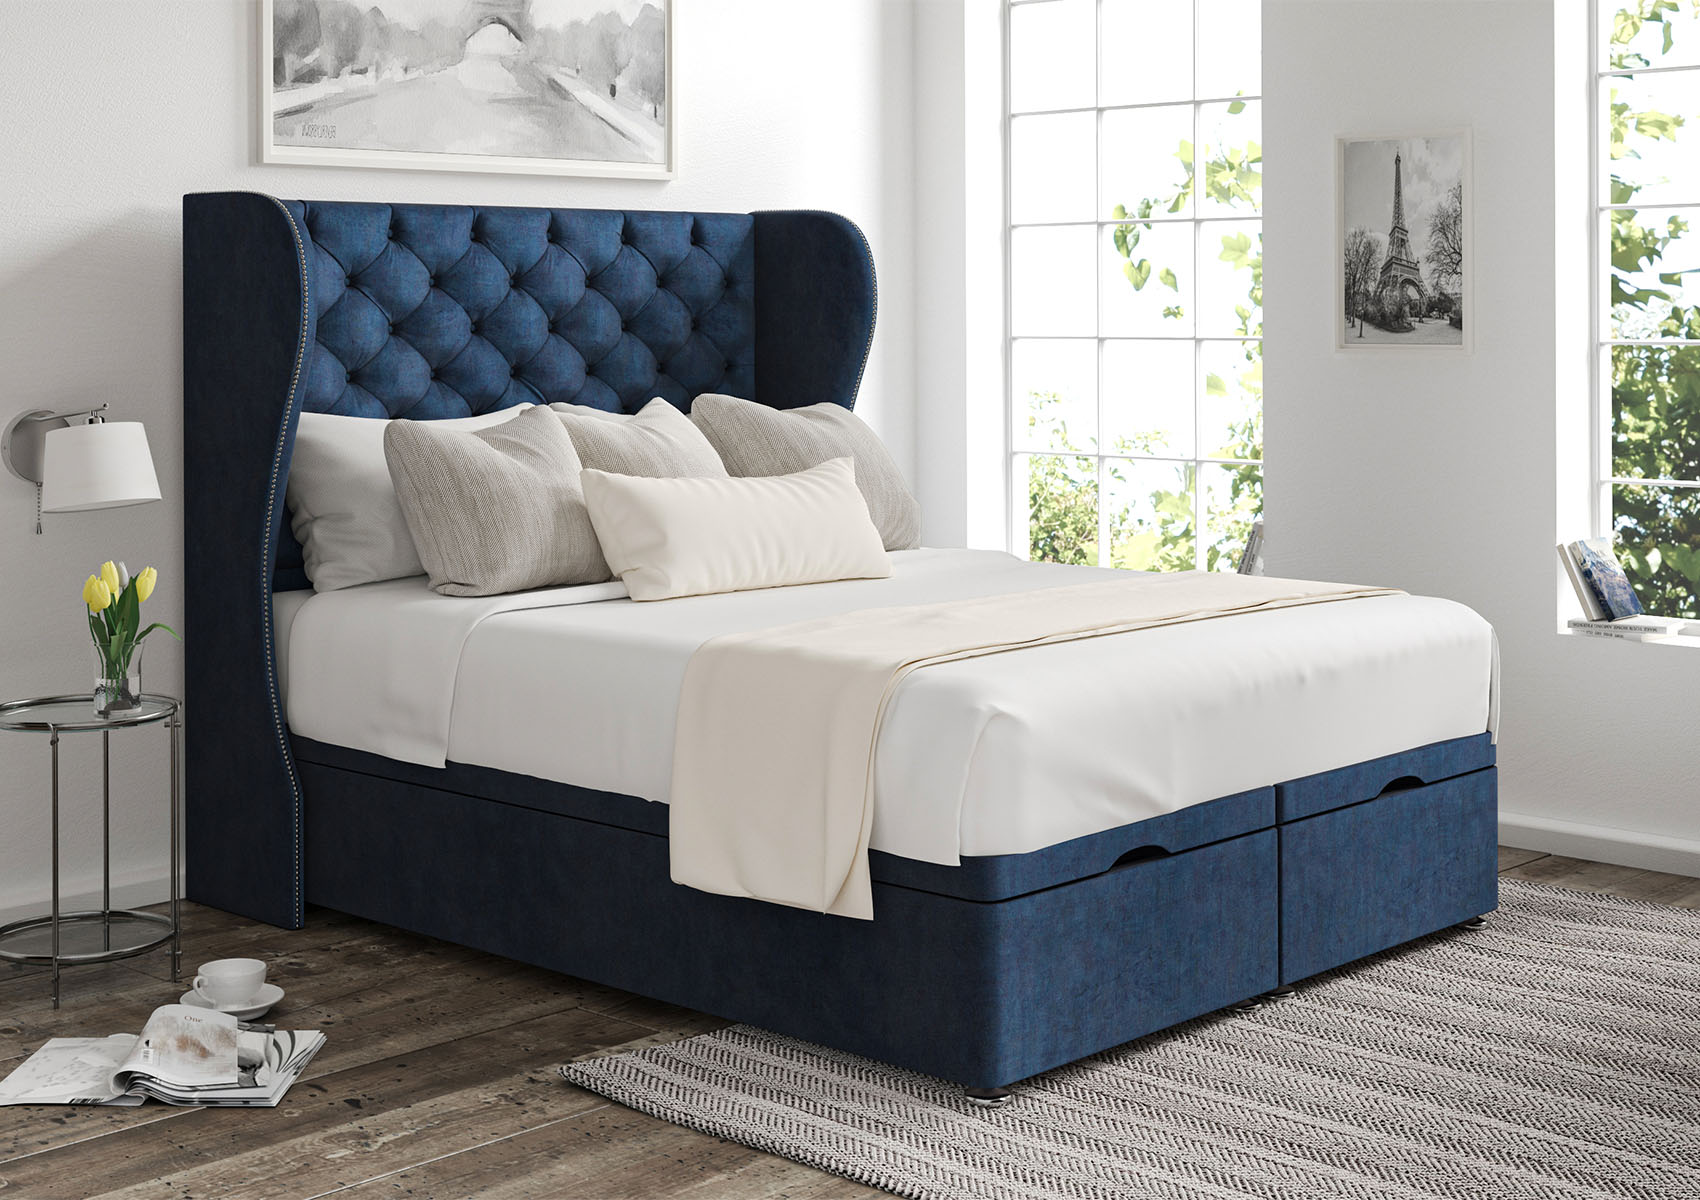 View Miami Carina Parchment Upholstered King Size Ottoman Bed Time4Sleep information